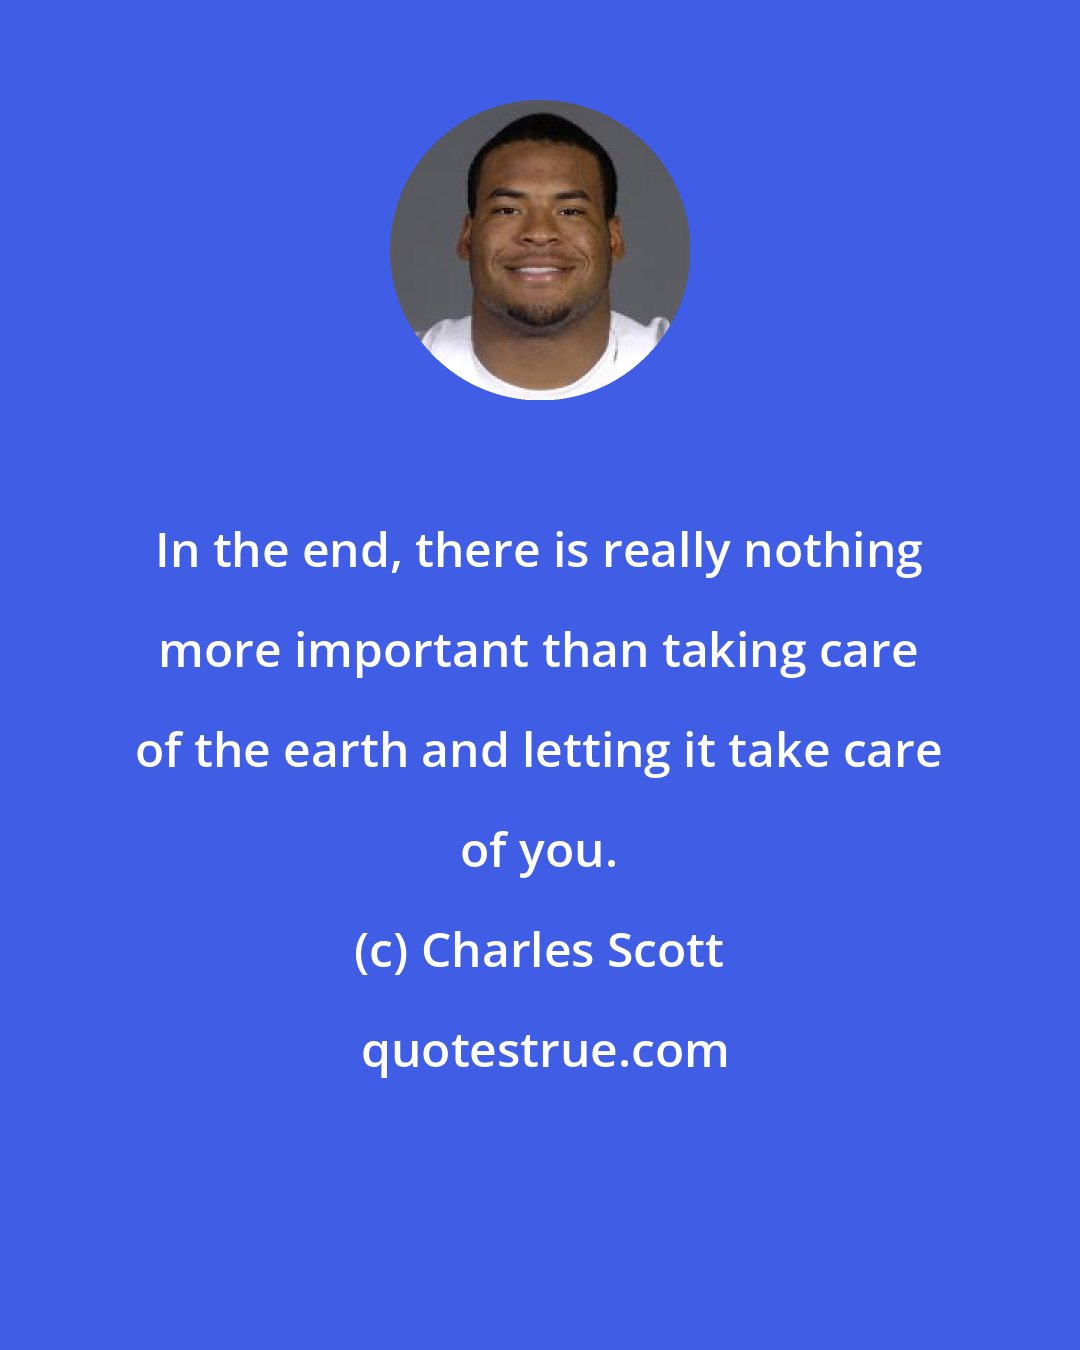 Charles Scott: In the end, there is really nothing more important than taking care of the earth and letting it take care of you.